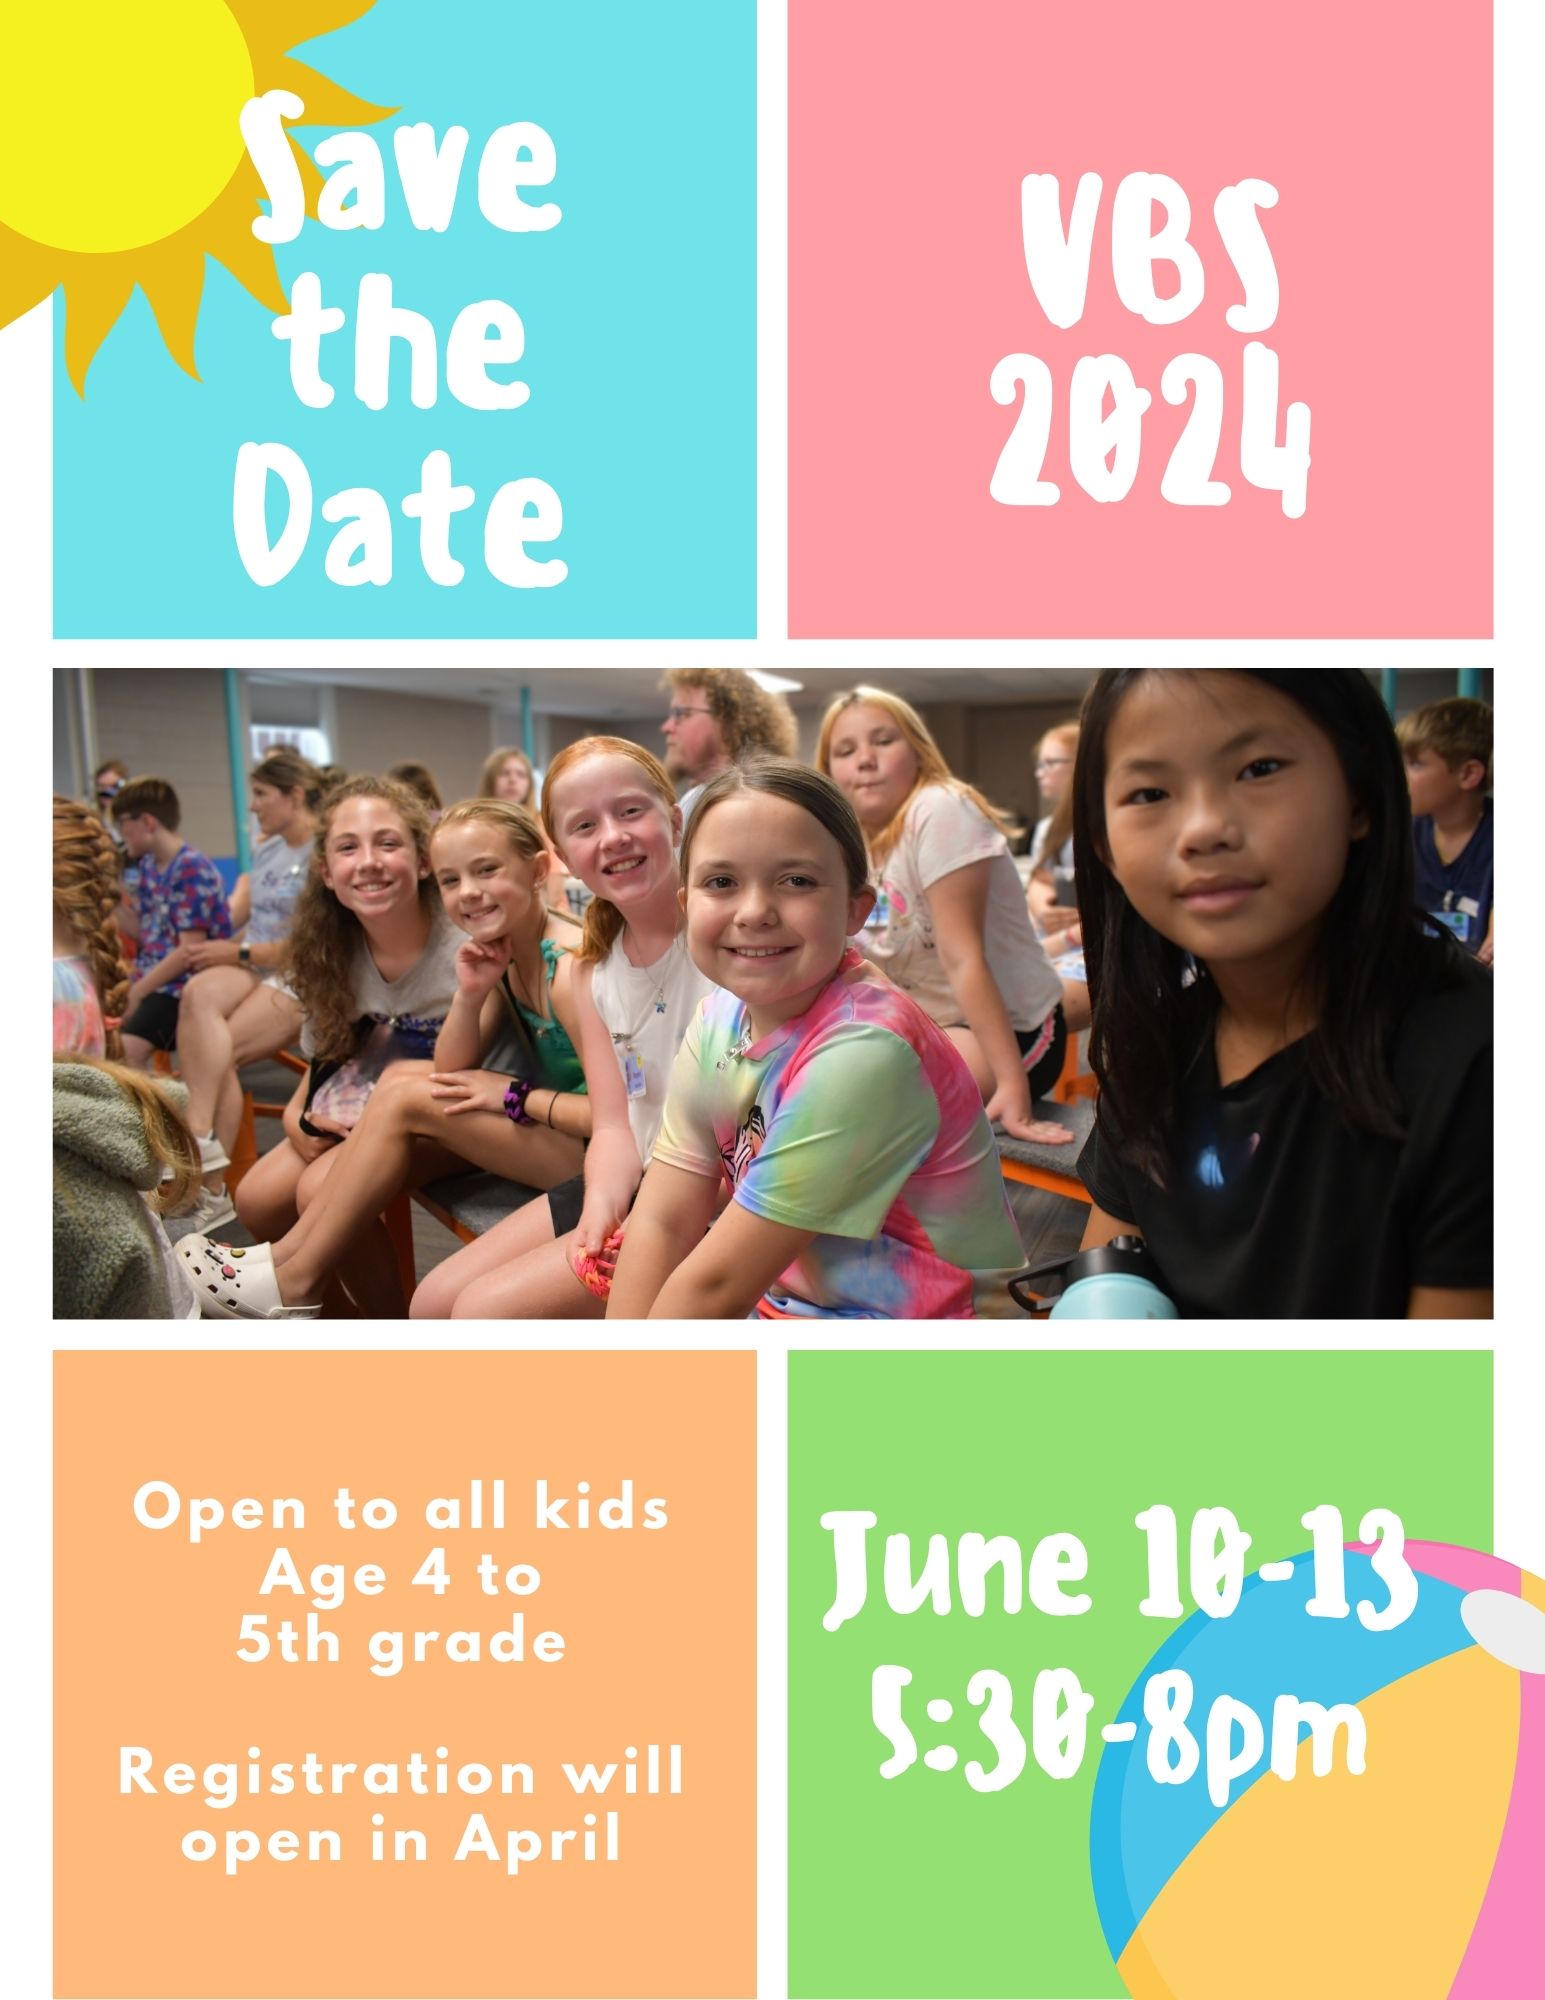 vbs-save-the-date.jpg